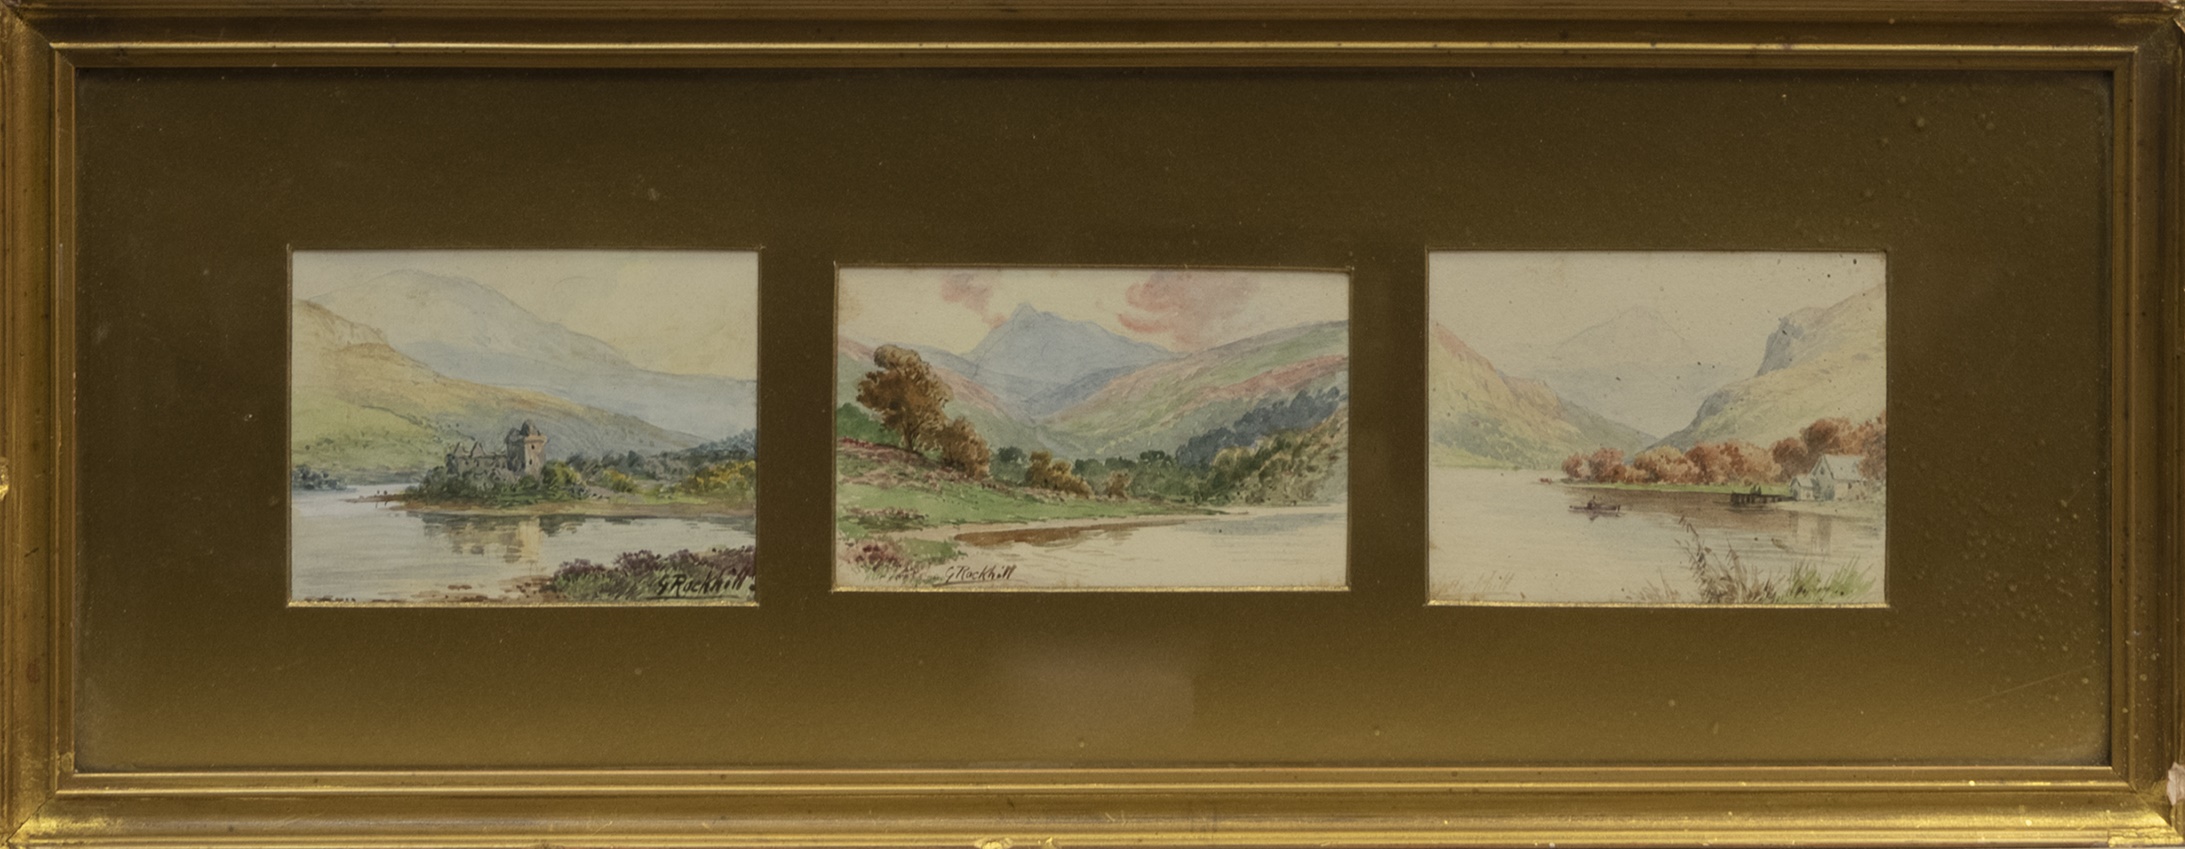 THREE LAKE SCENE WATERCOLOURS BY GEORGE ROCKHILL